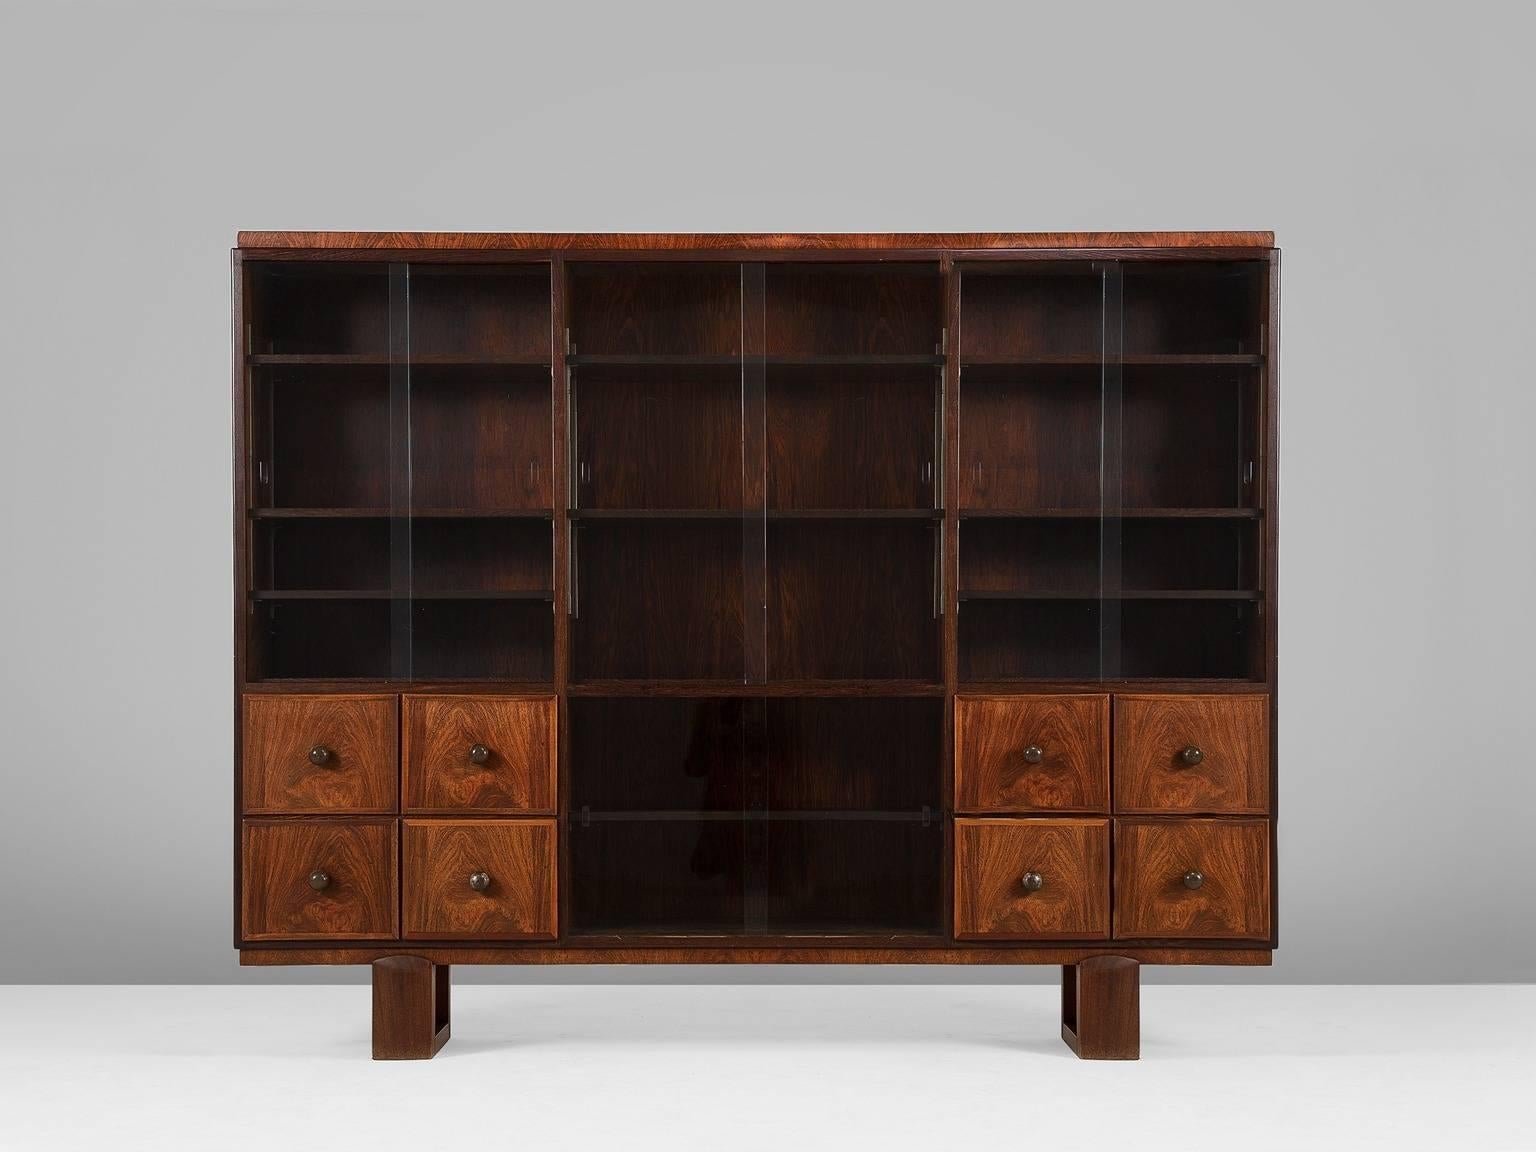 Cabinet, in wood and glass, France, 1960s. 

A very large French two-section display cabinet with adjustable shelving and glass doors. 8 large drawers on the bottom half, finished in beautiful wood. The rosewood shows a nice warm grain. The shelves